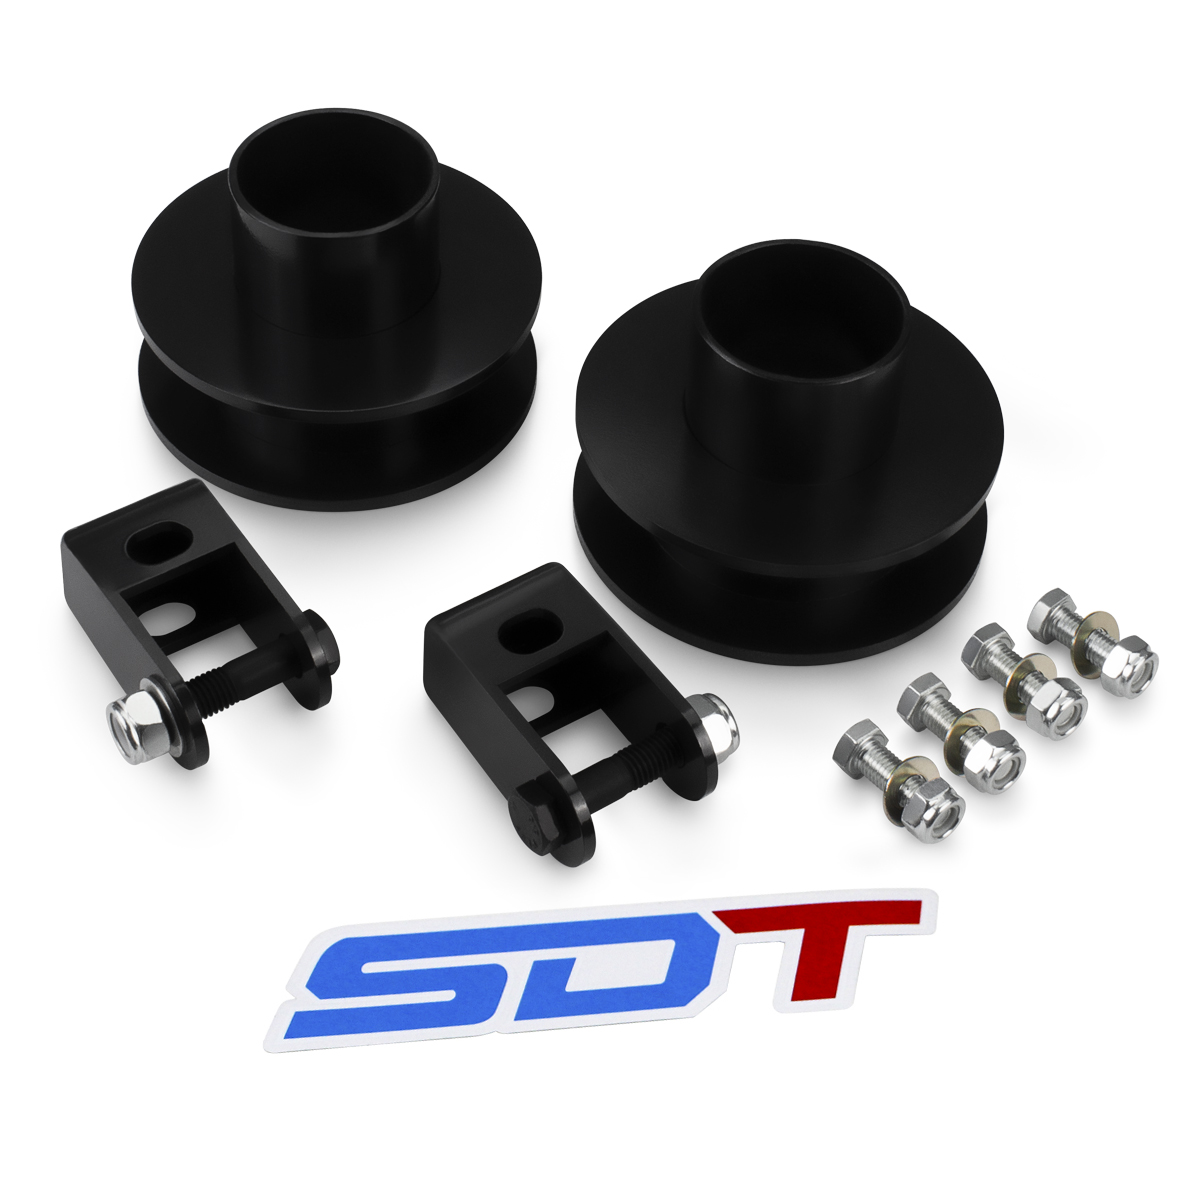 Ford F250 F350 3.5 inch Front Lift Leveling Kit with Shock Extenders 2005 2006 2007 2008 2009 2010 2011 2012 2013 2014 2015 2016 2017 2018 2019